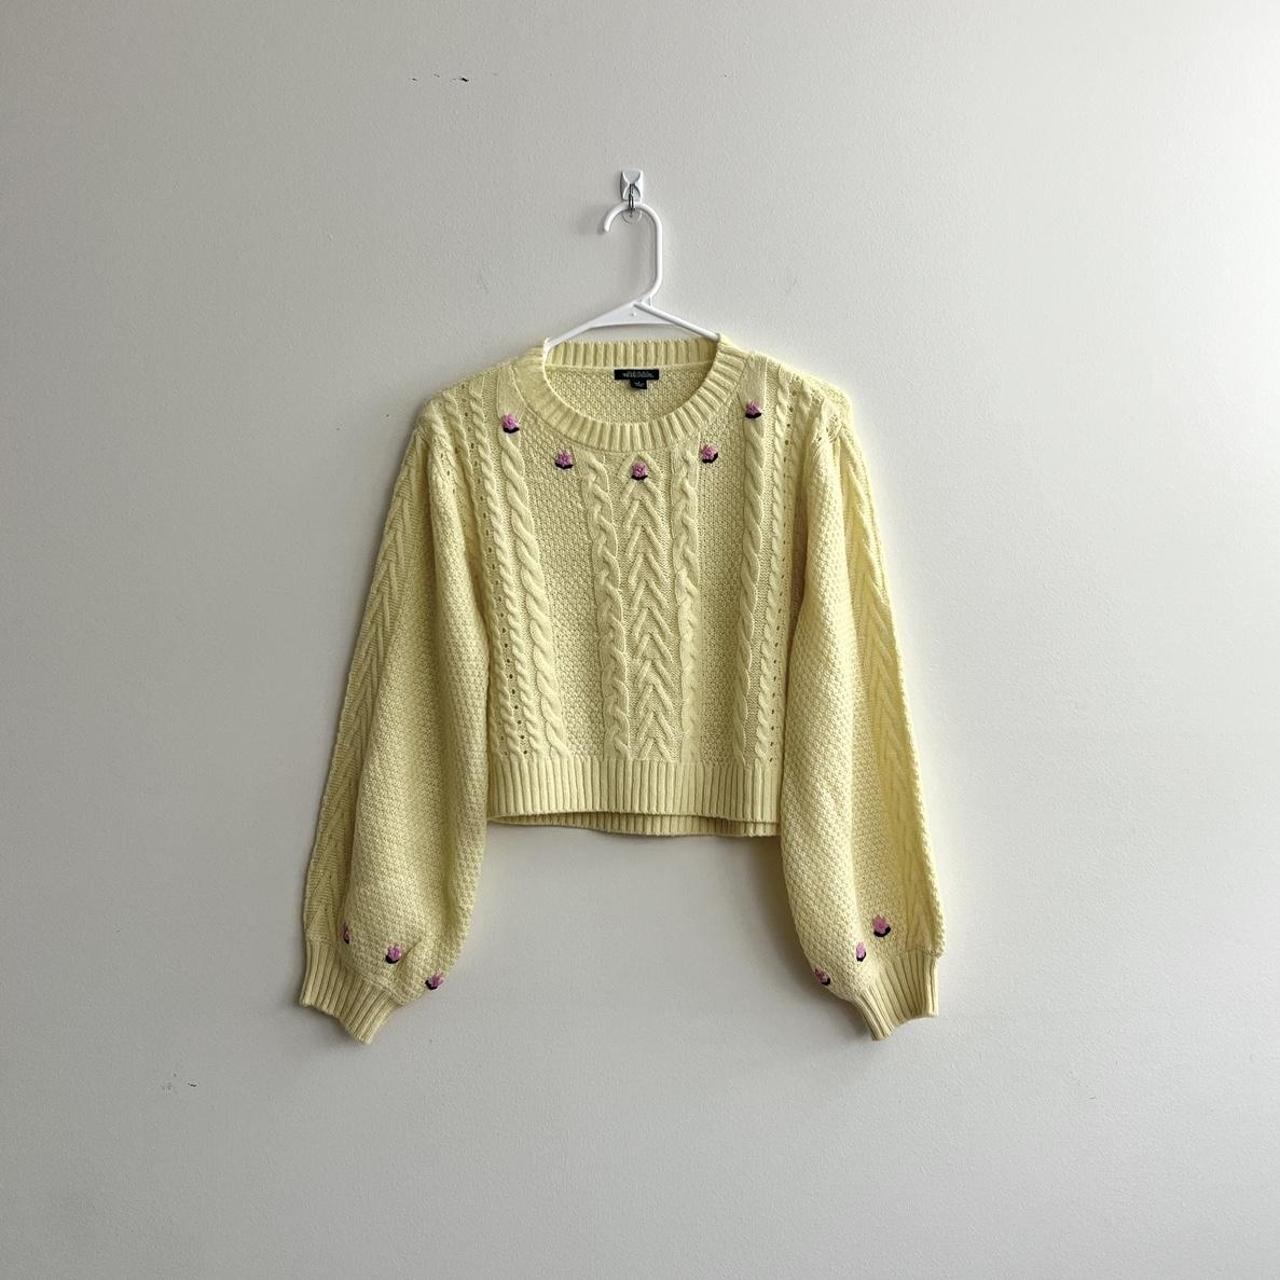 WILD FABLE Sweater Space Dye/Ombre Pink Crew - Depop